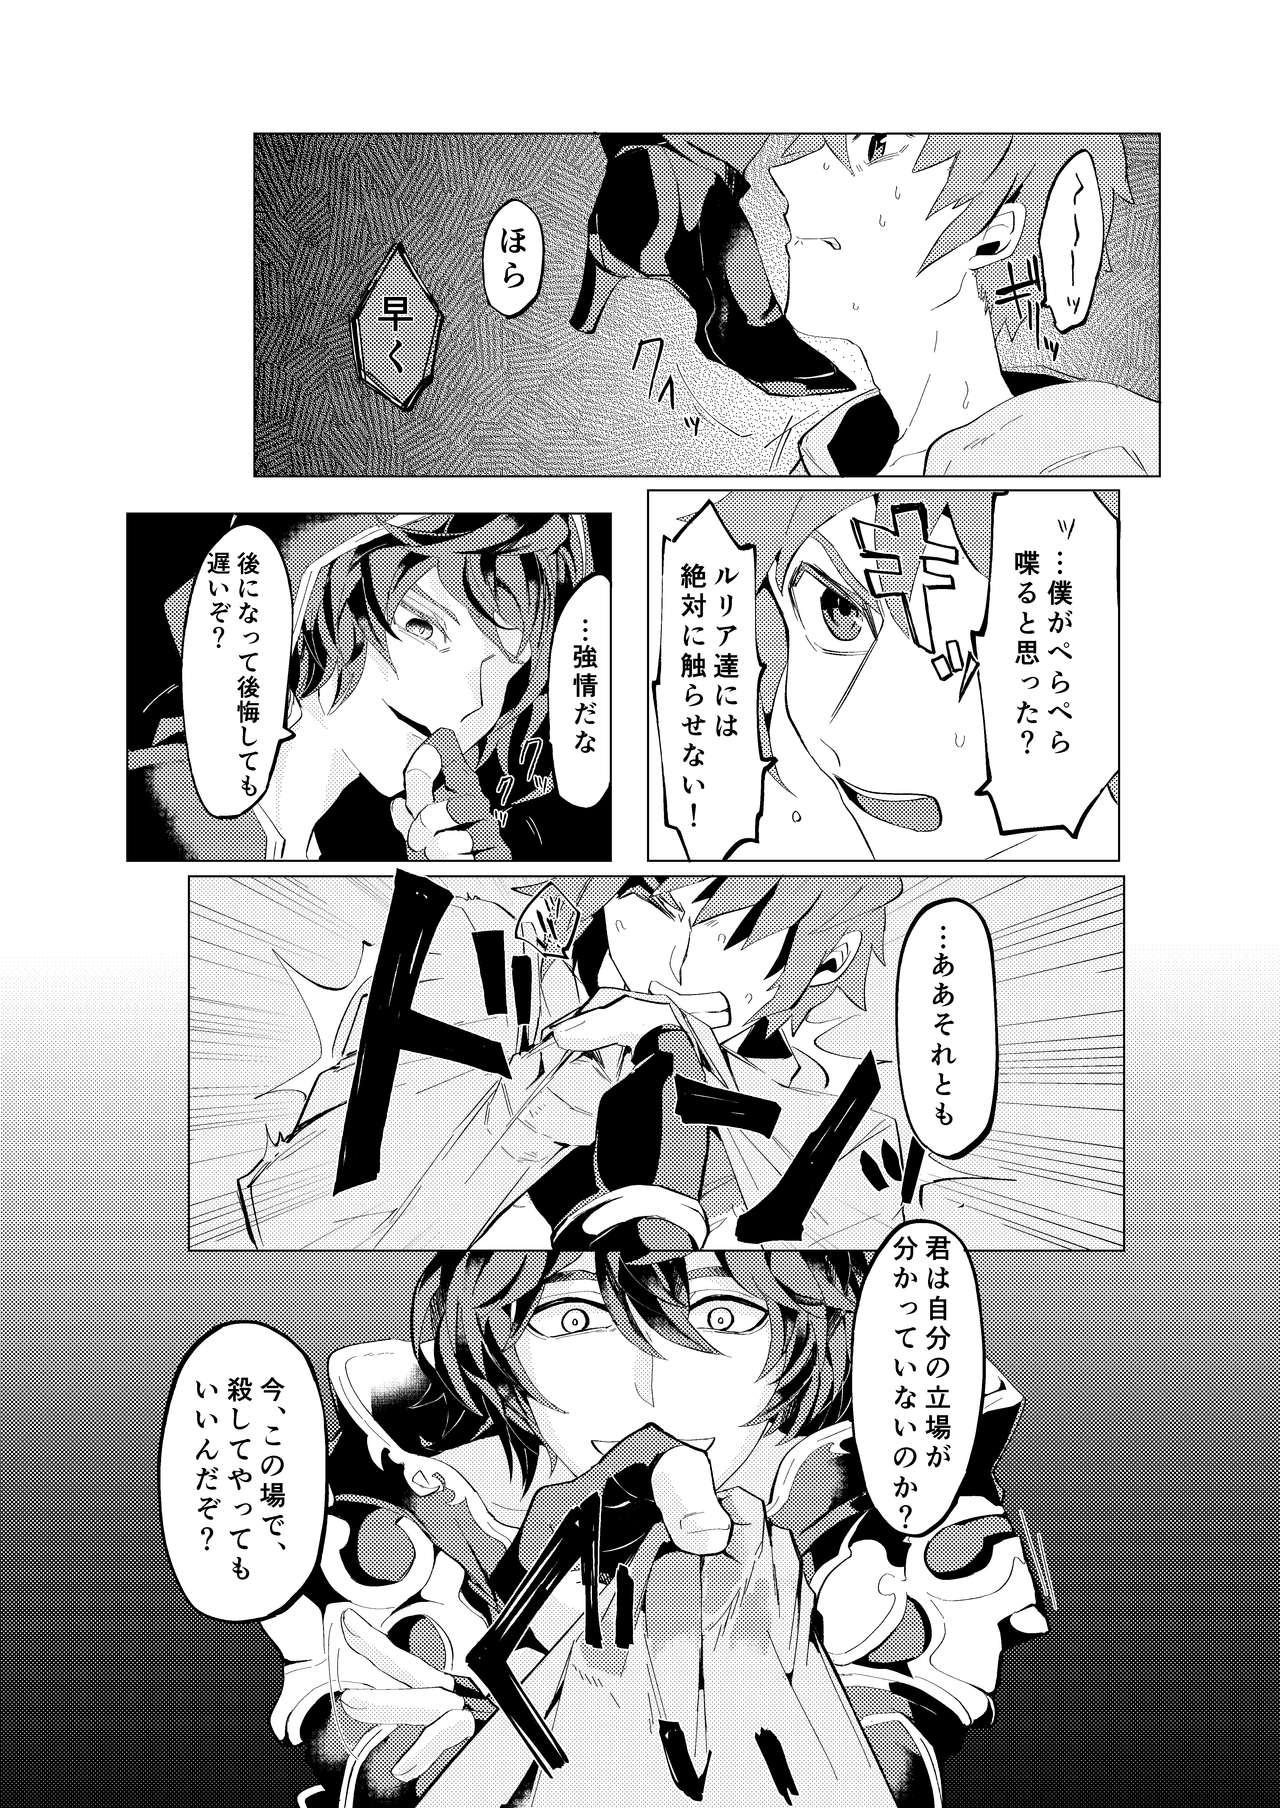 Freaky Disaster - Granblue fantasy Penetration - Page 6